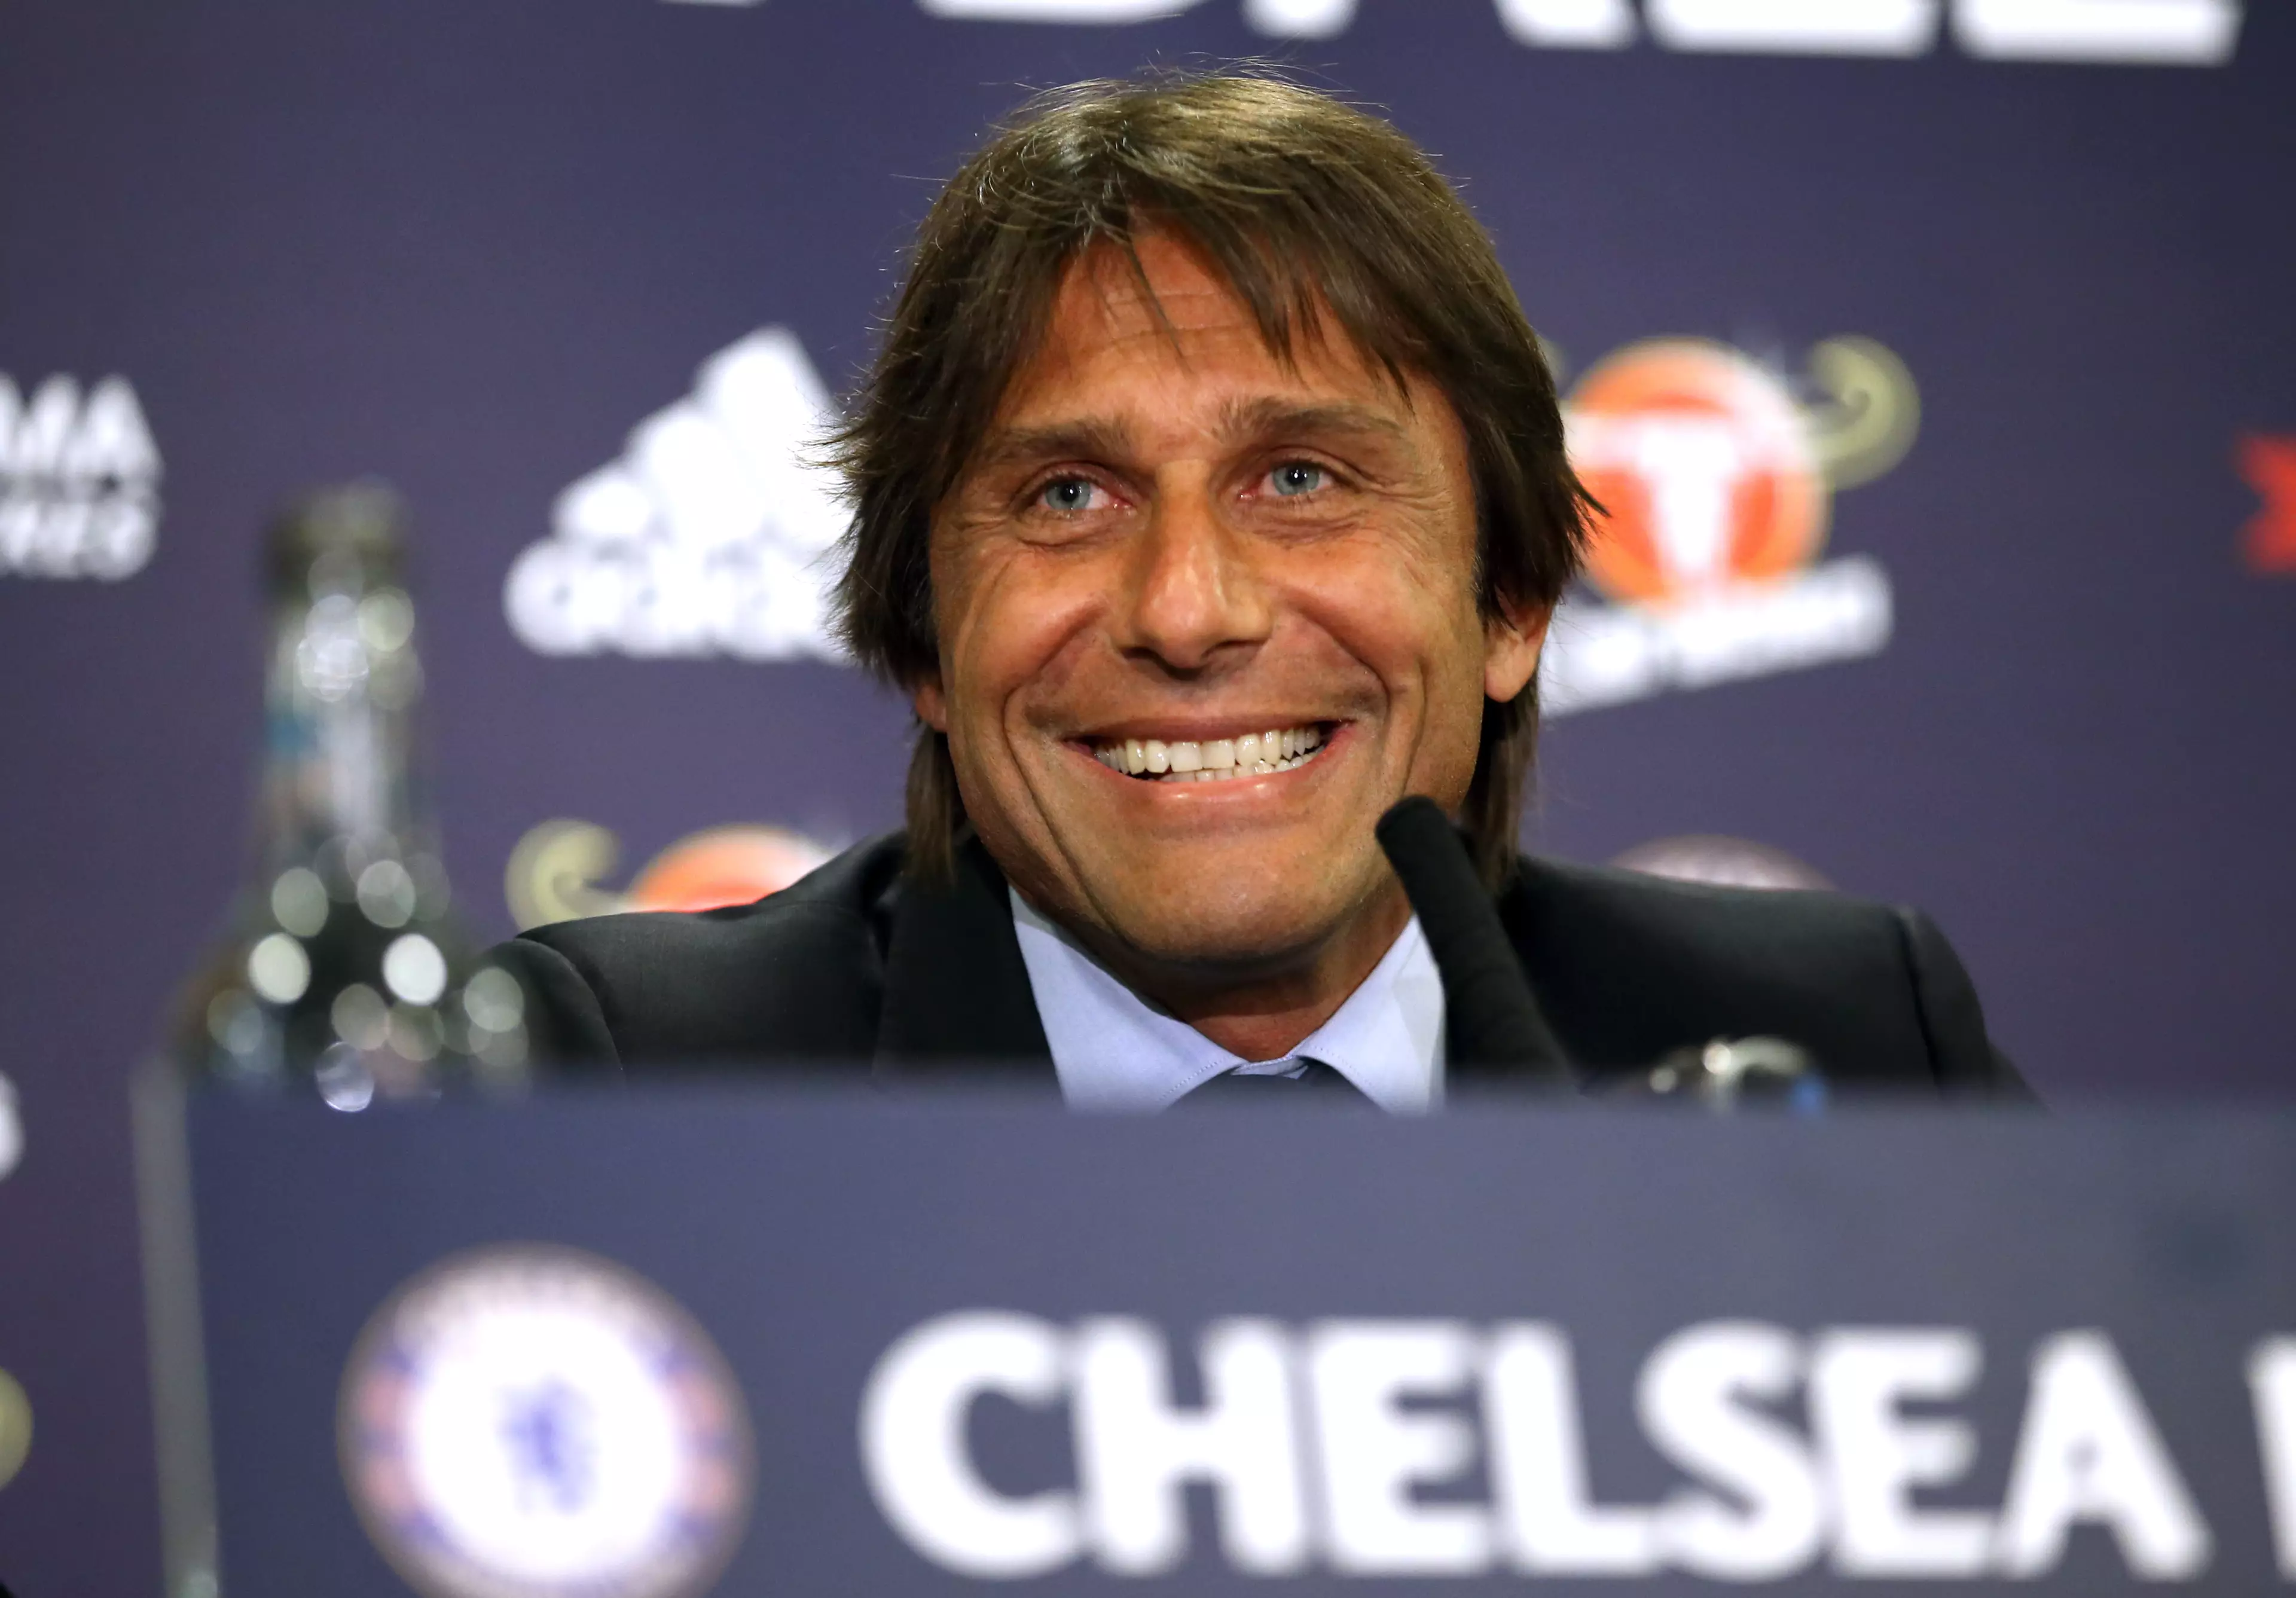 TheODDSbible's Chelsea v Arsenal Betting Preview